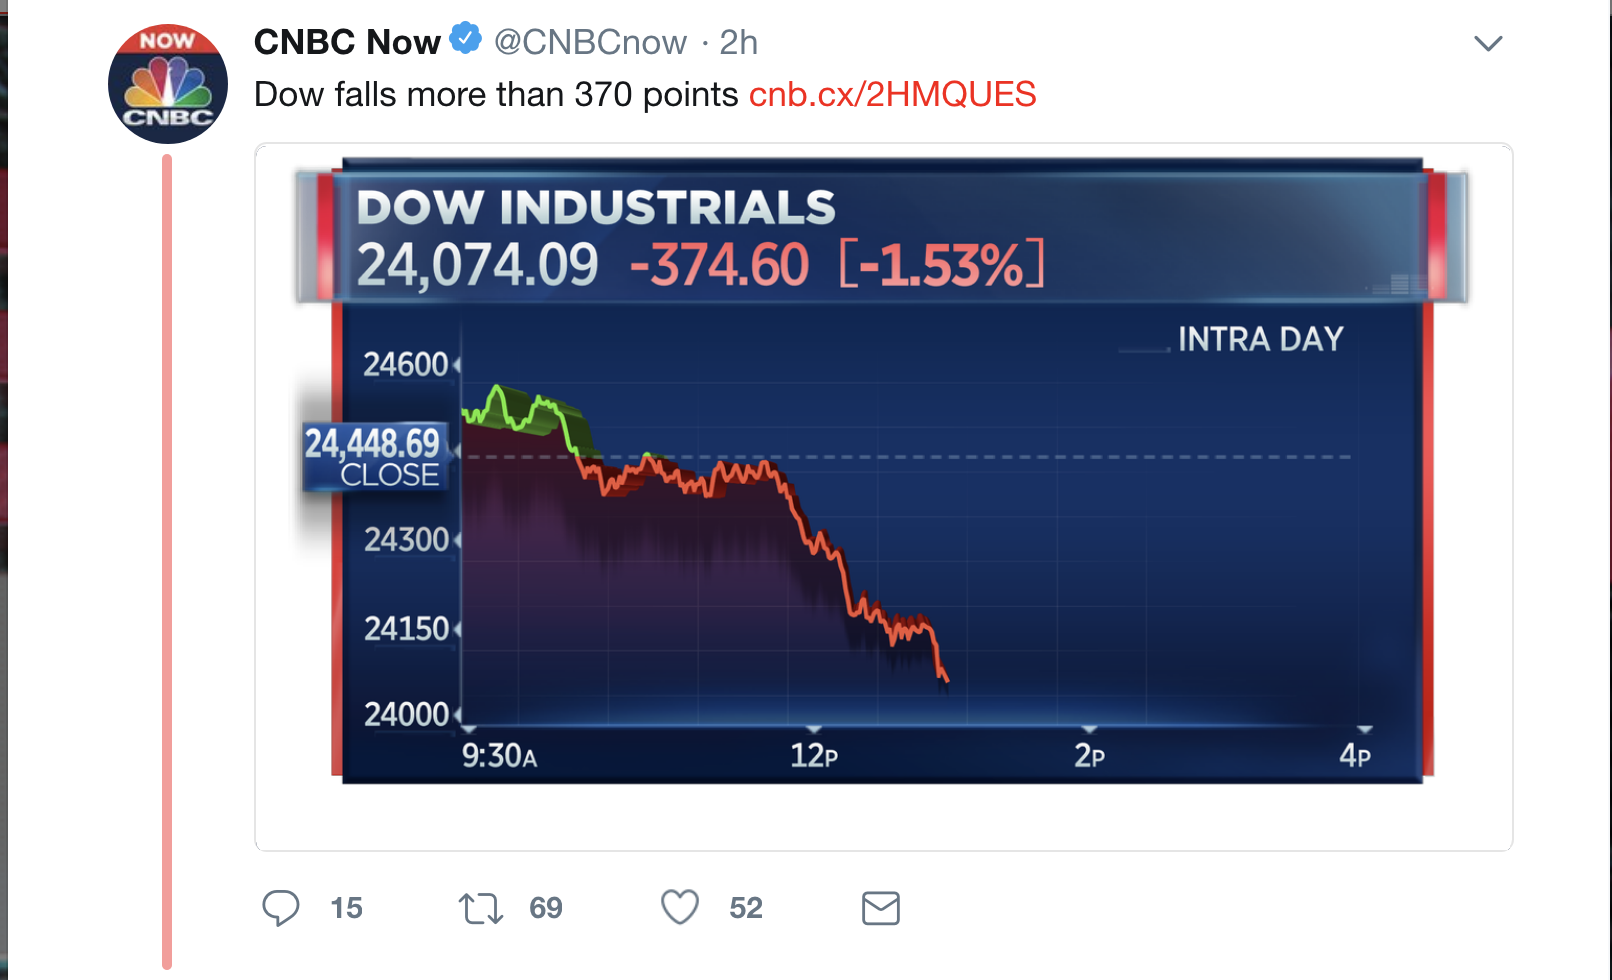 Screen-Shot-2018-04-24-at-1.37.15-PM BREAKING: Stock Market Dow Plummets For Two Hours - Investors In Full Freakout Mode Domestic Policy Donald Trump Economy Politics Top Stories 